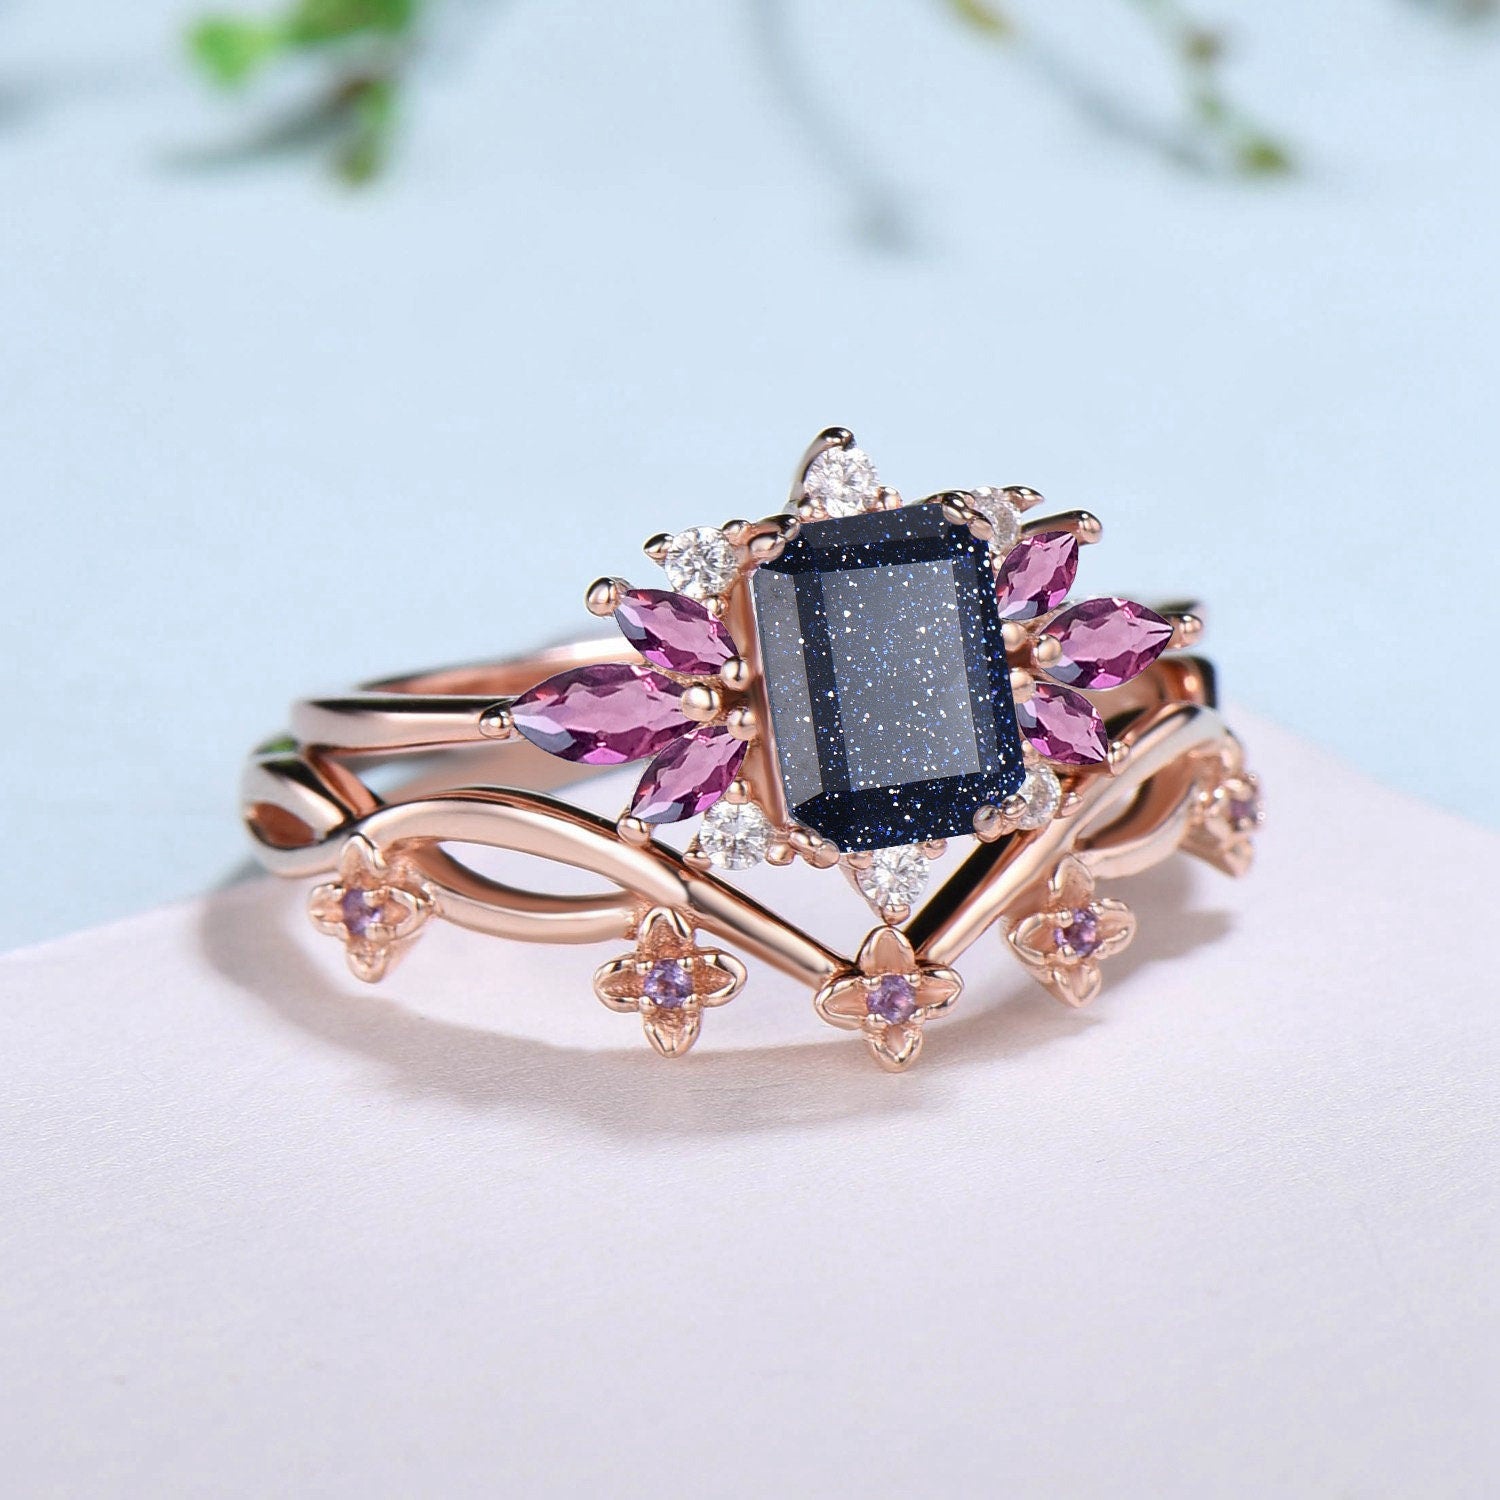 Emerald Cut Galaxy Blue Sandstone Engagement Ring Set Marquise Amethyst Wedding Ring Set Women Unique Branch Bridal Set Personalized Gift - PENFINE